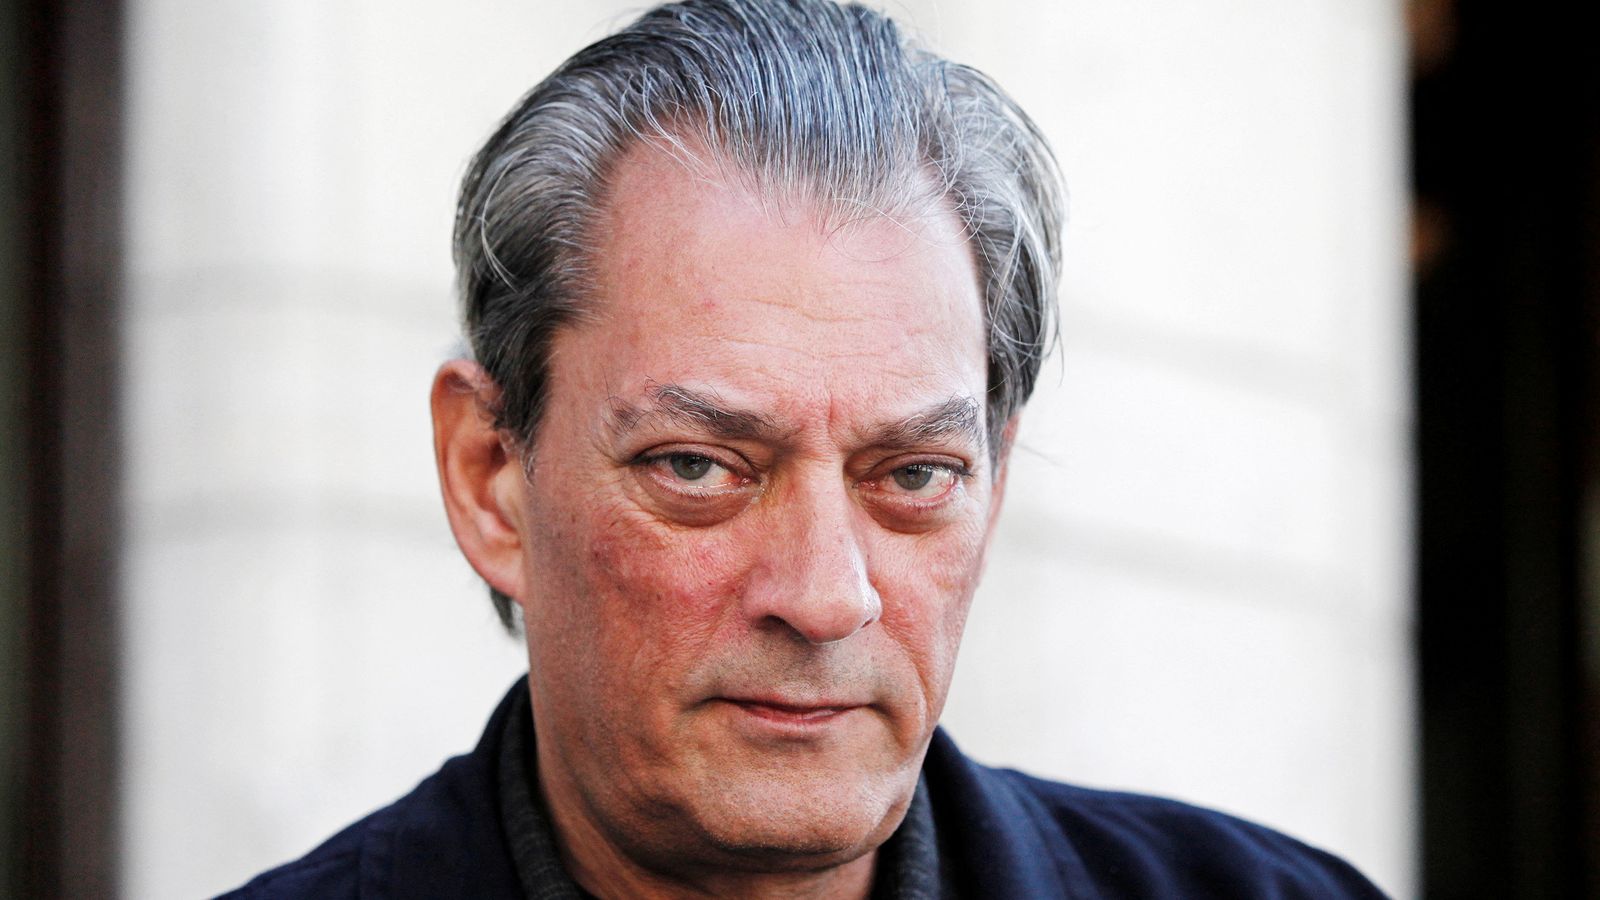 Paul Auster, author of New York Trilogy and 4 3 2 1, dies aged 77 | Ents & Arts News